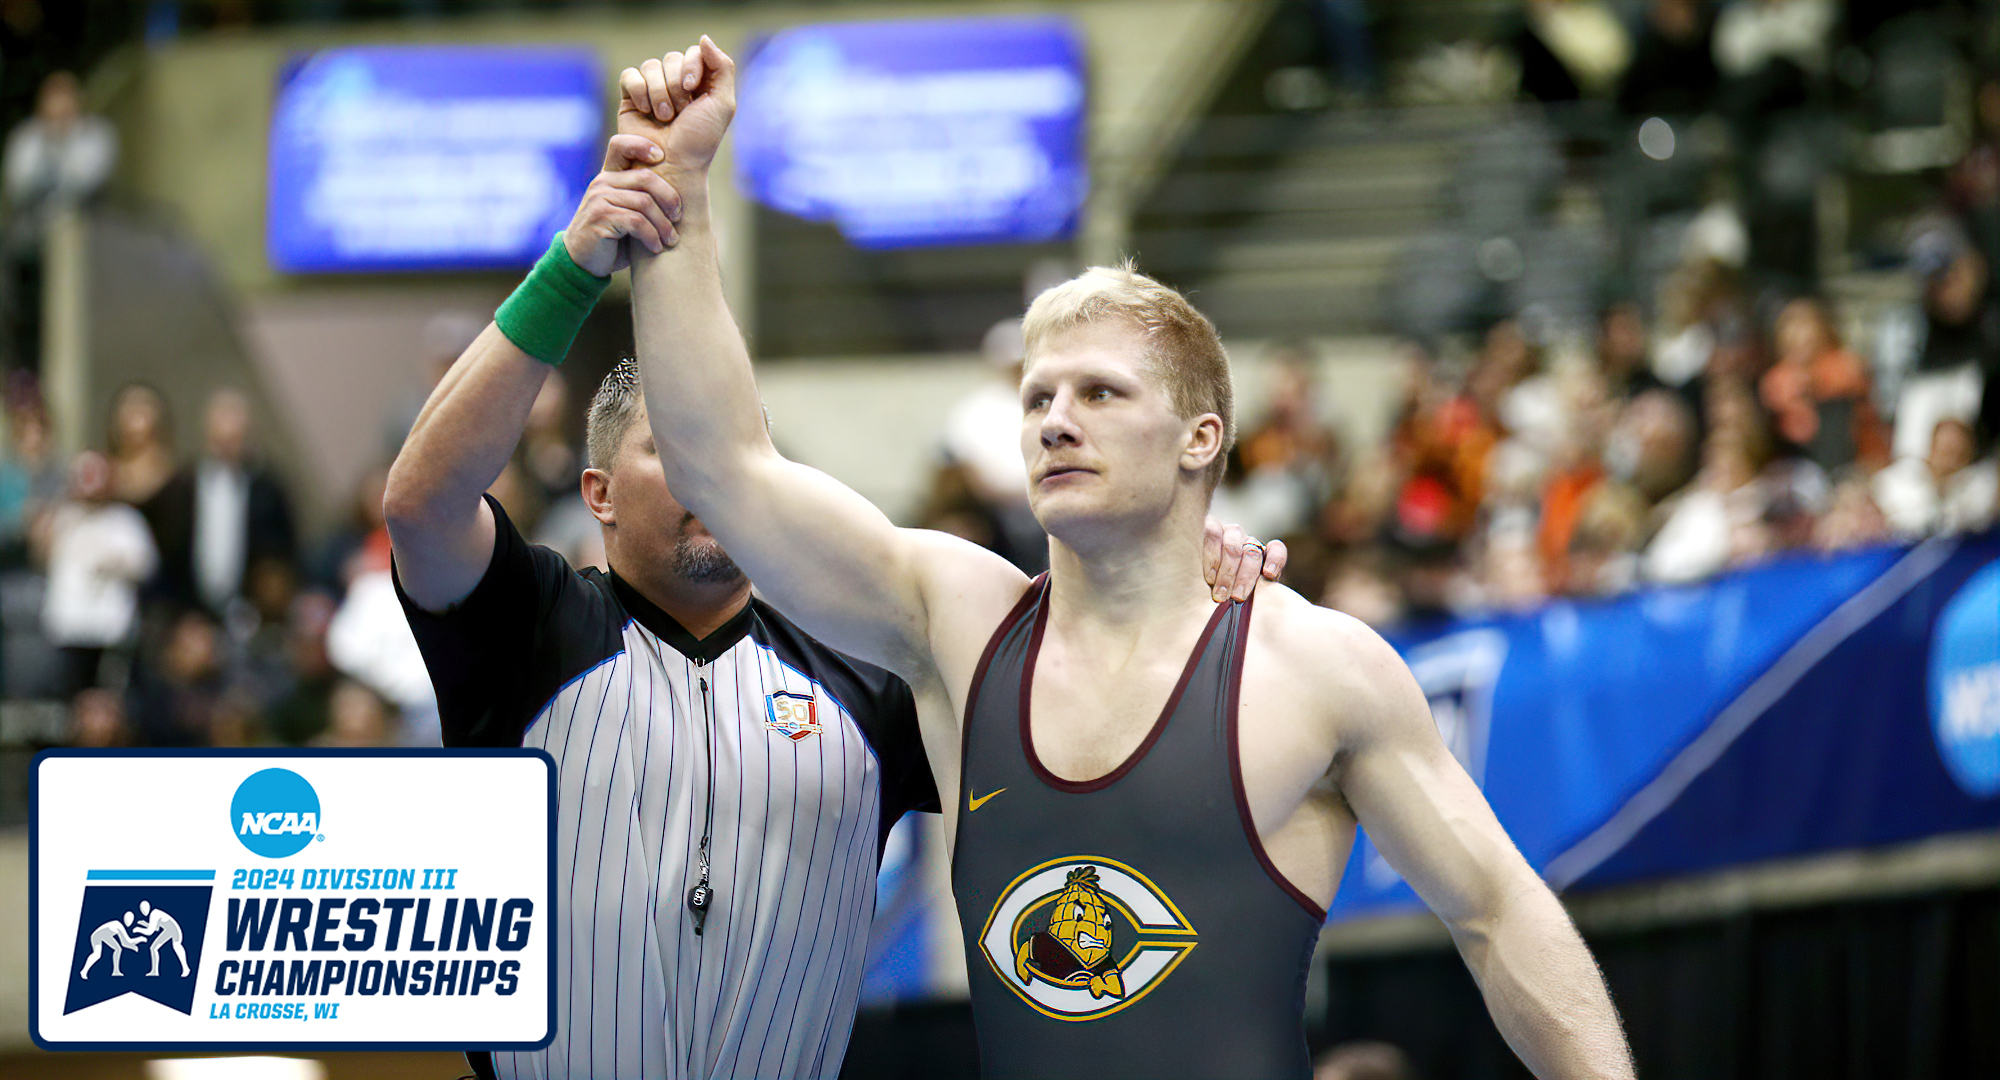 Gabe Zierden gets his hand raised after winning the semifinal match at the NCAA National Meet.